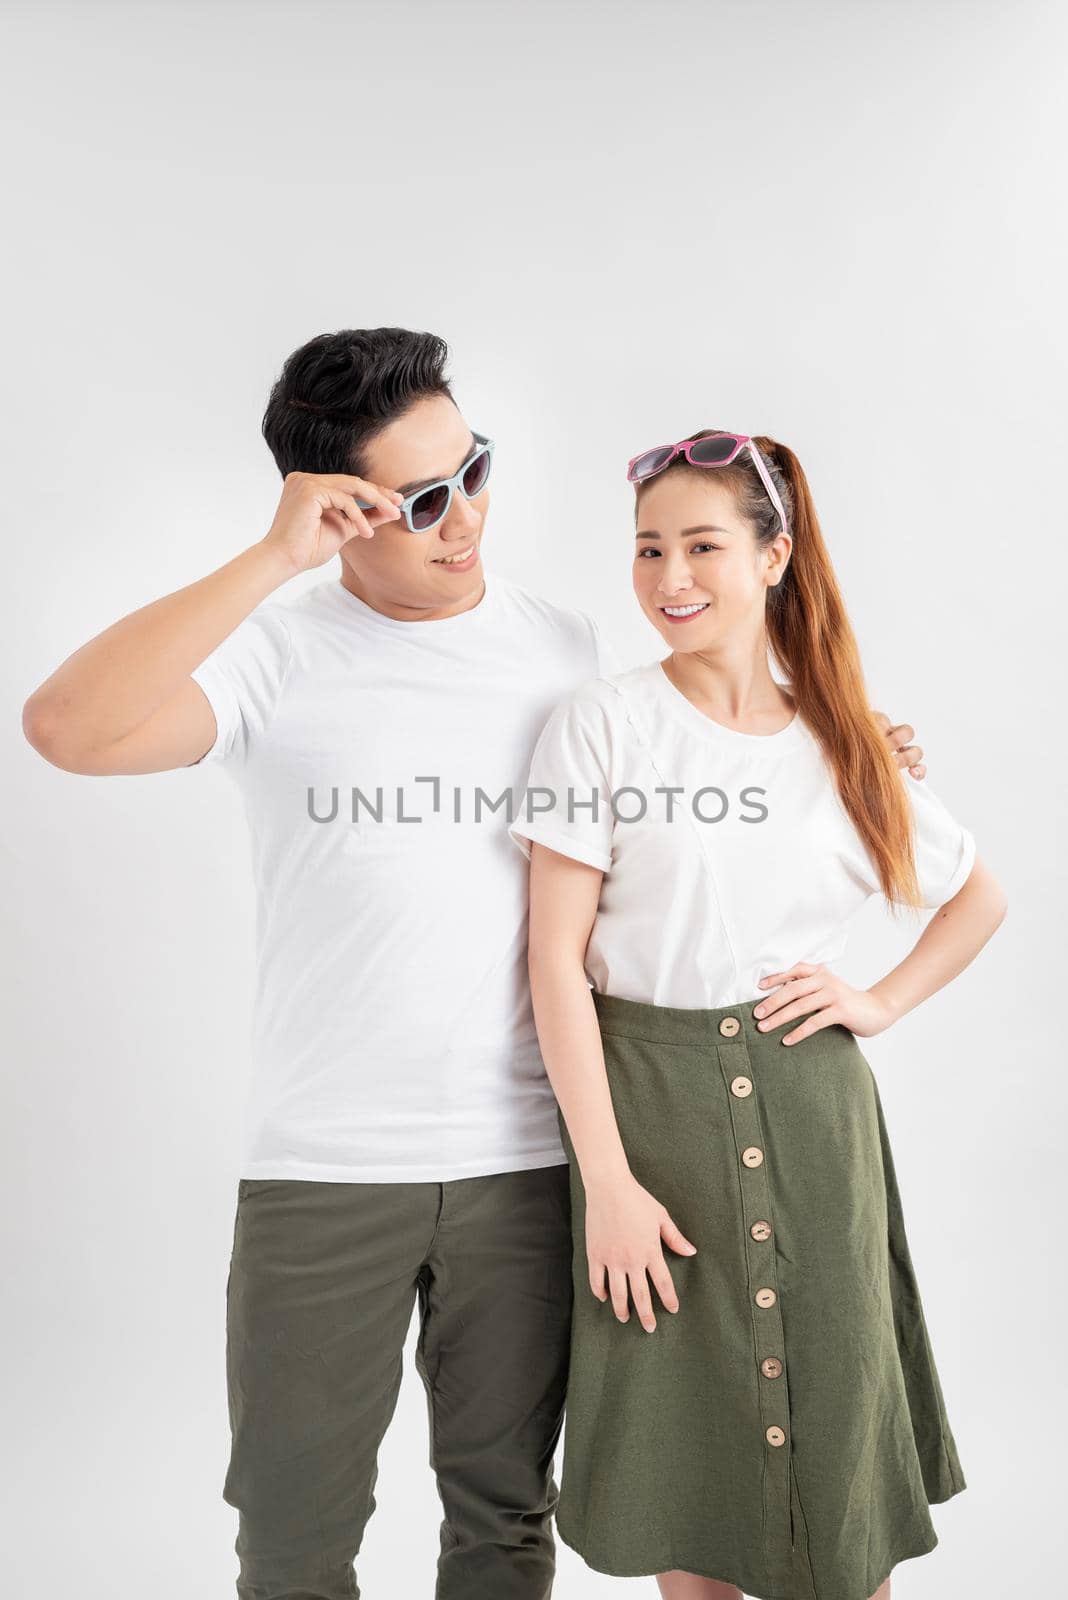 Studio shot of two surprised terrific woman and man look in bewilderment, touch rim of spectacles, being amazed by sudden news, stand against white background